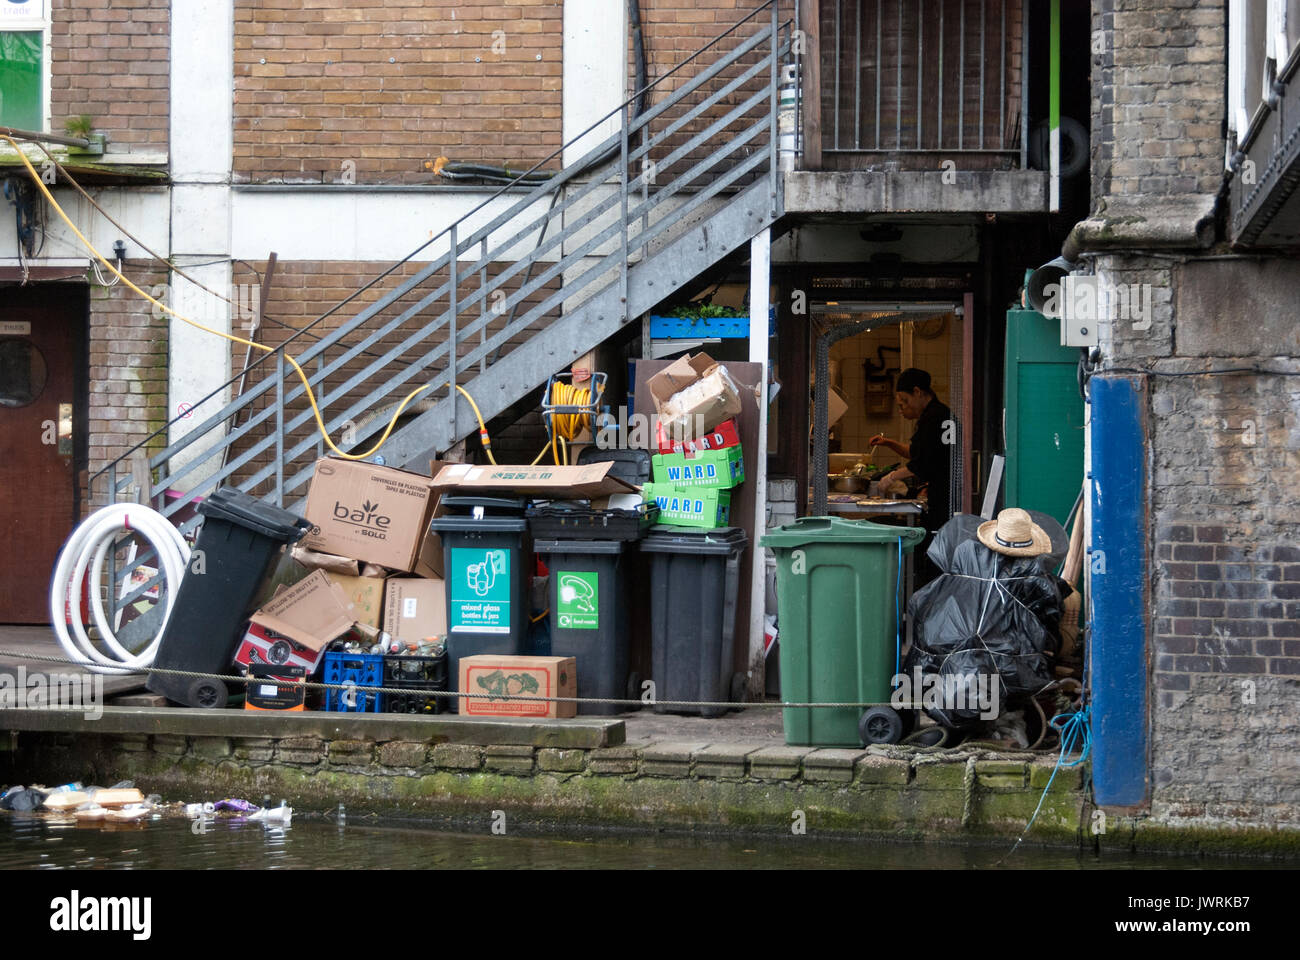 London England, Camden Lock, Rubbish at Back Door of Kitchen Entrance, Person Cooking with Kitchen Door Open, Rubbish in Lake, Bins Full, Market Area Stock Photo